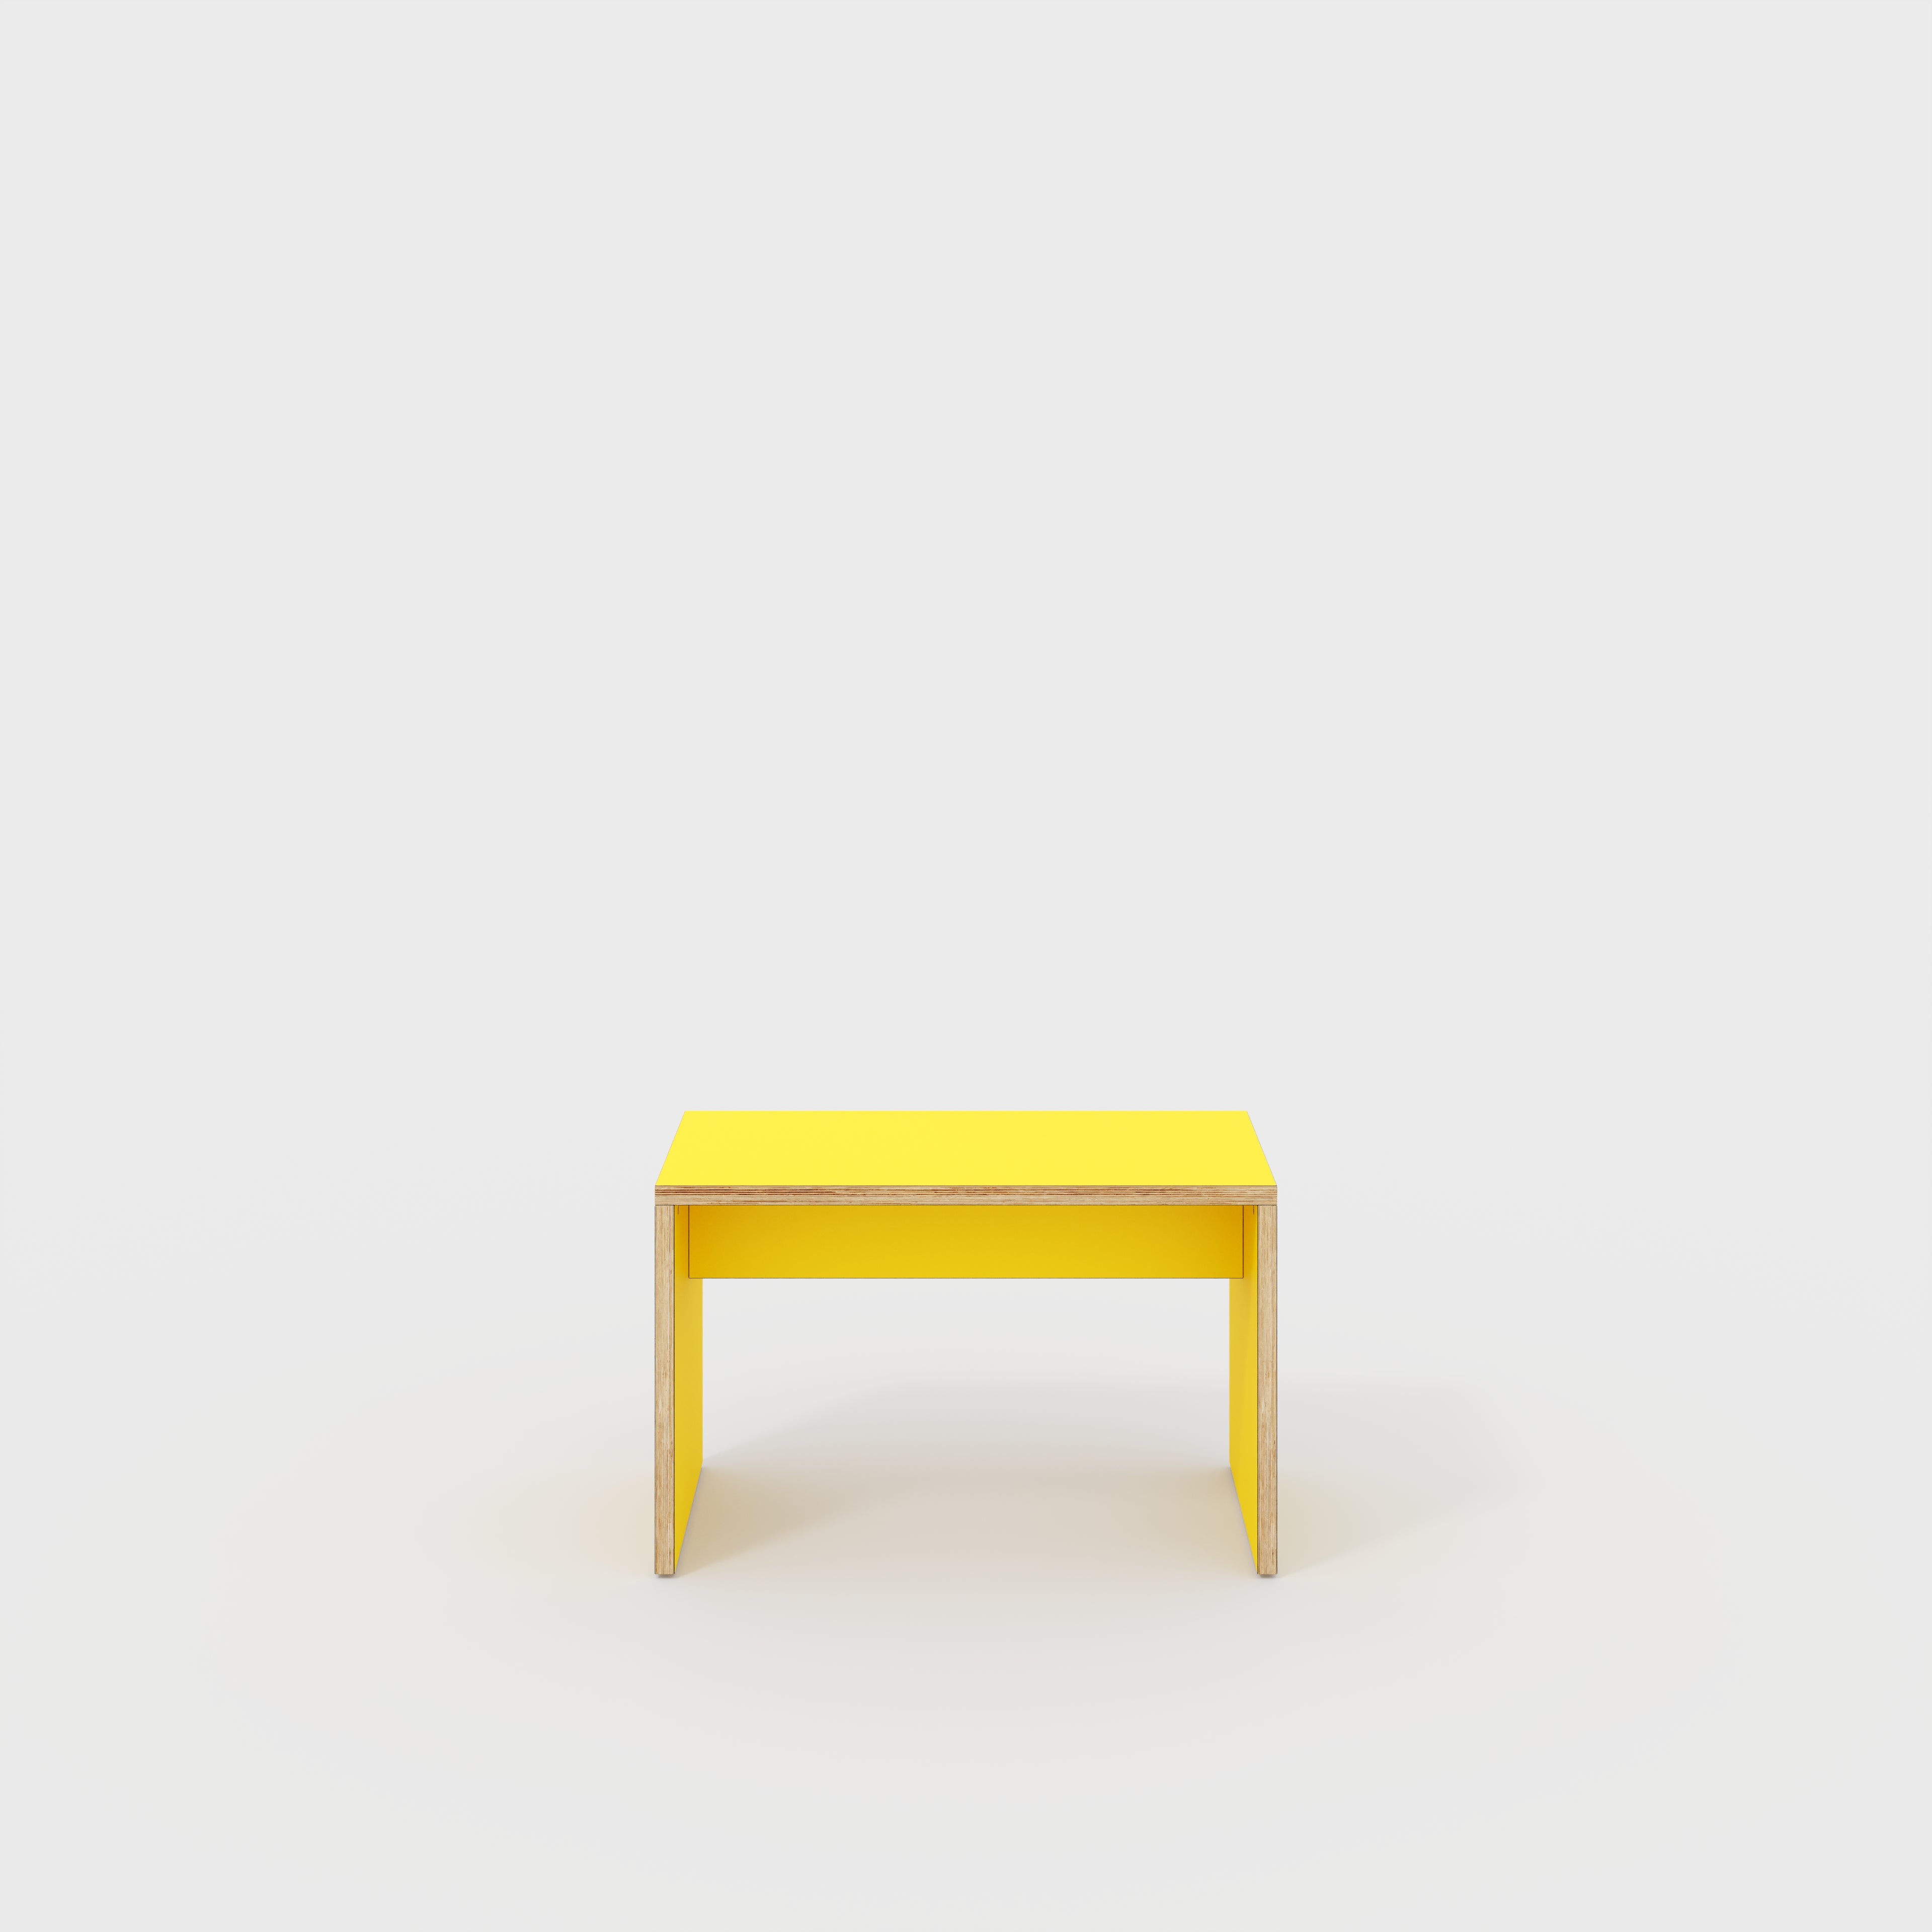 Kids Desk with Solid Sides - Formica Chrome Yellow - 800(w) x 400(d) x 500(h)